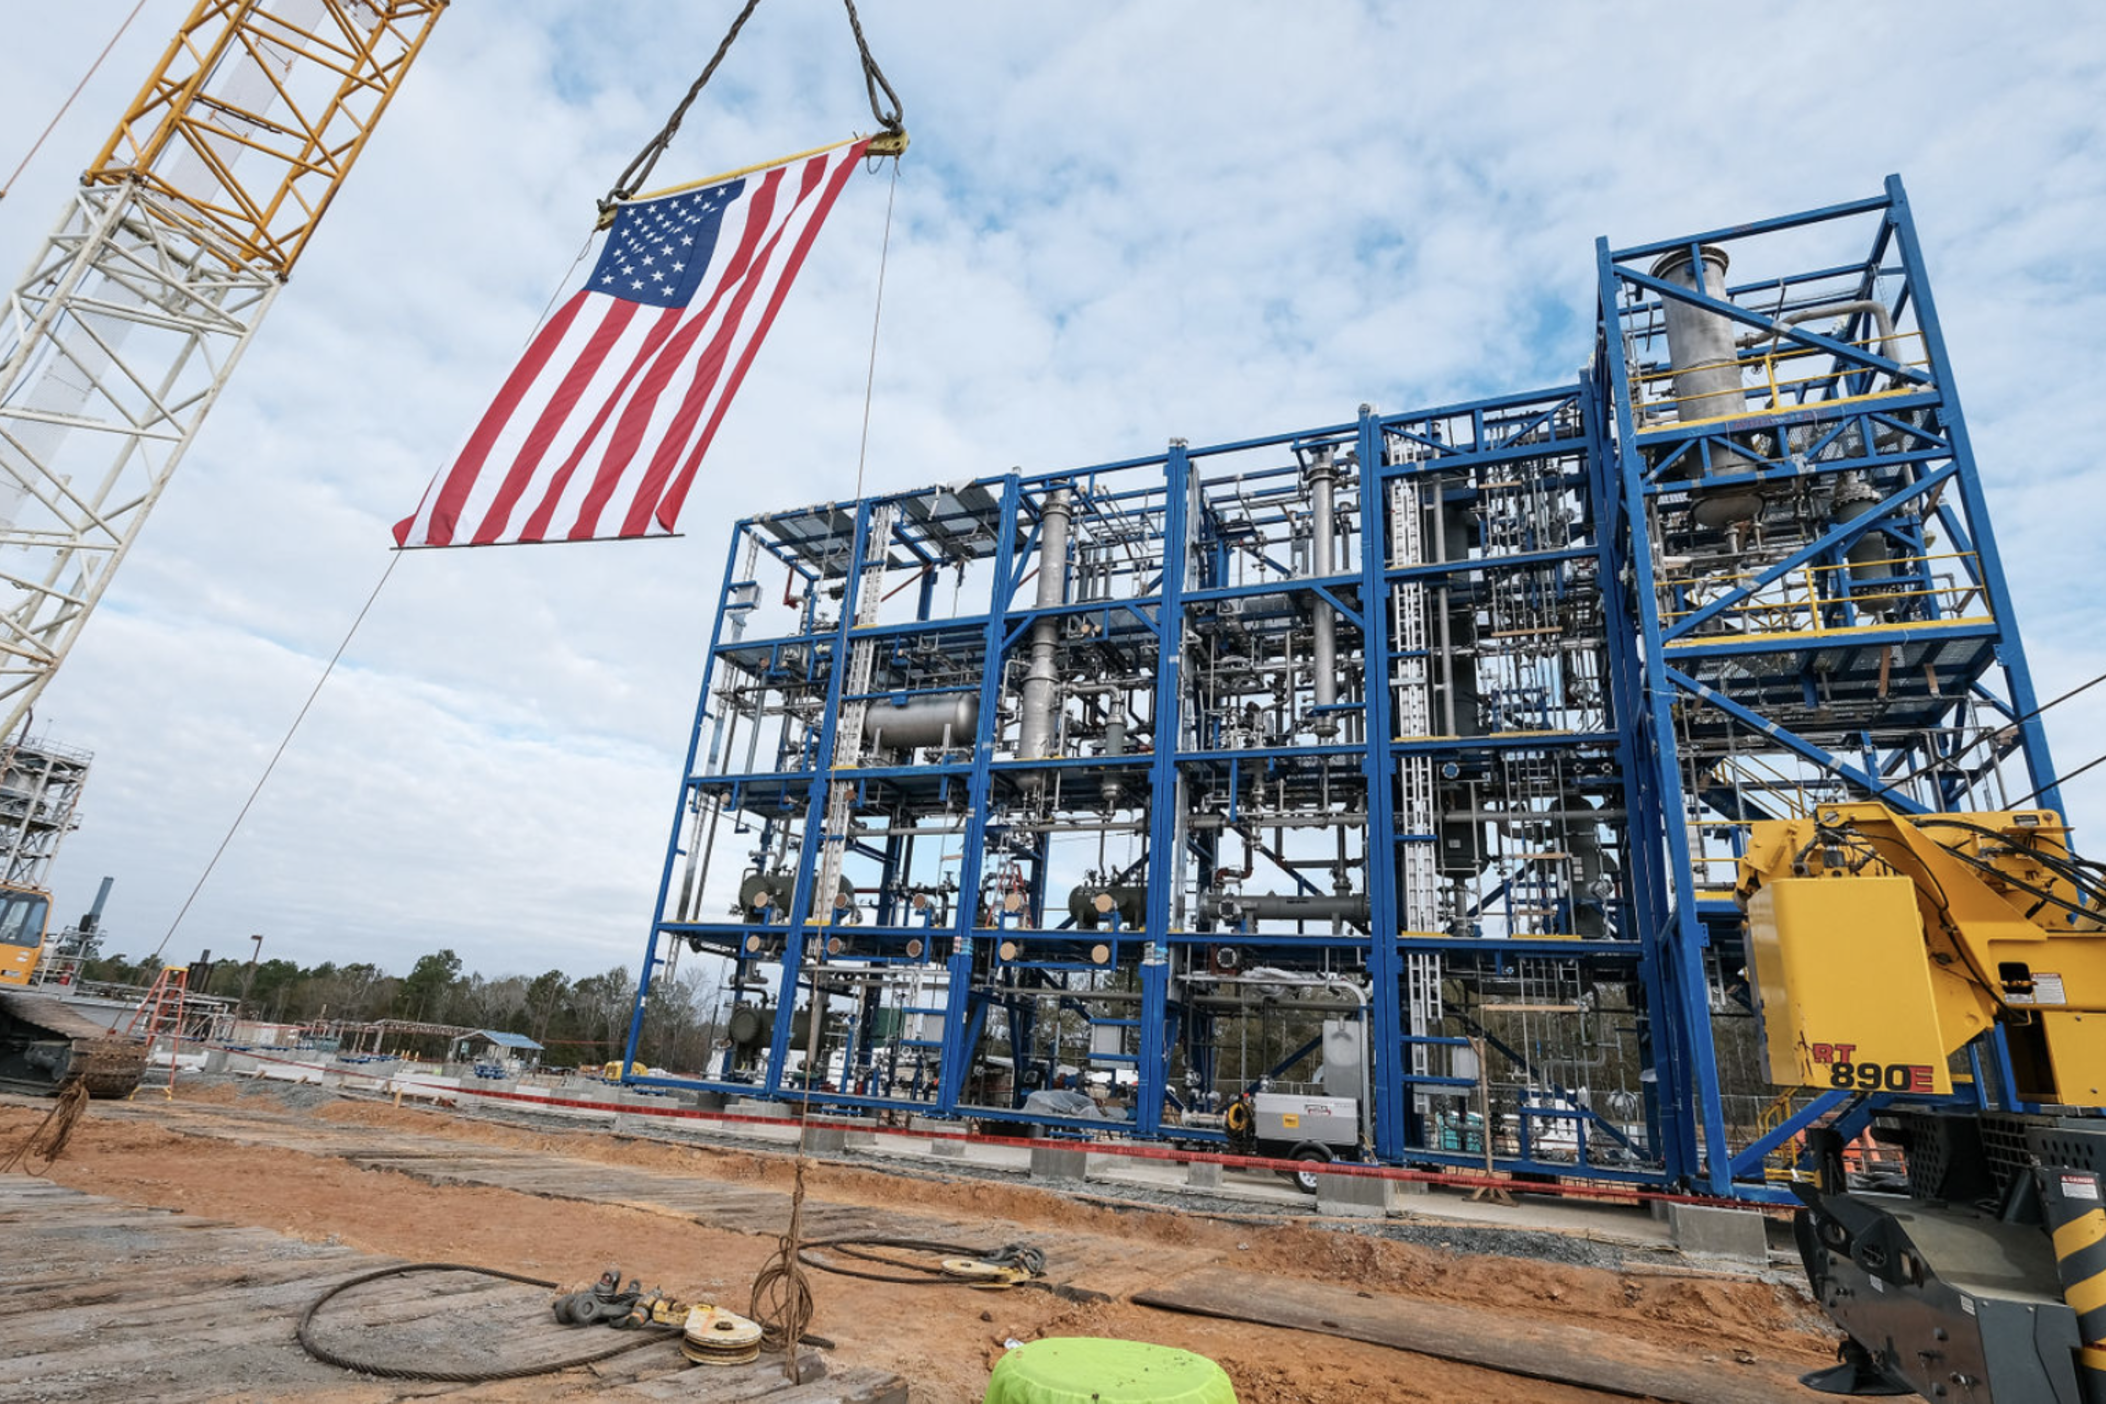 The Freedom Pines Fuels facility, under construction in Soperton, is slated to become the first commercially operated alcohol-to-jet fuel refinery in North America, according to owner LanzaJet.